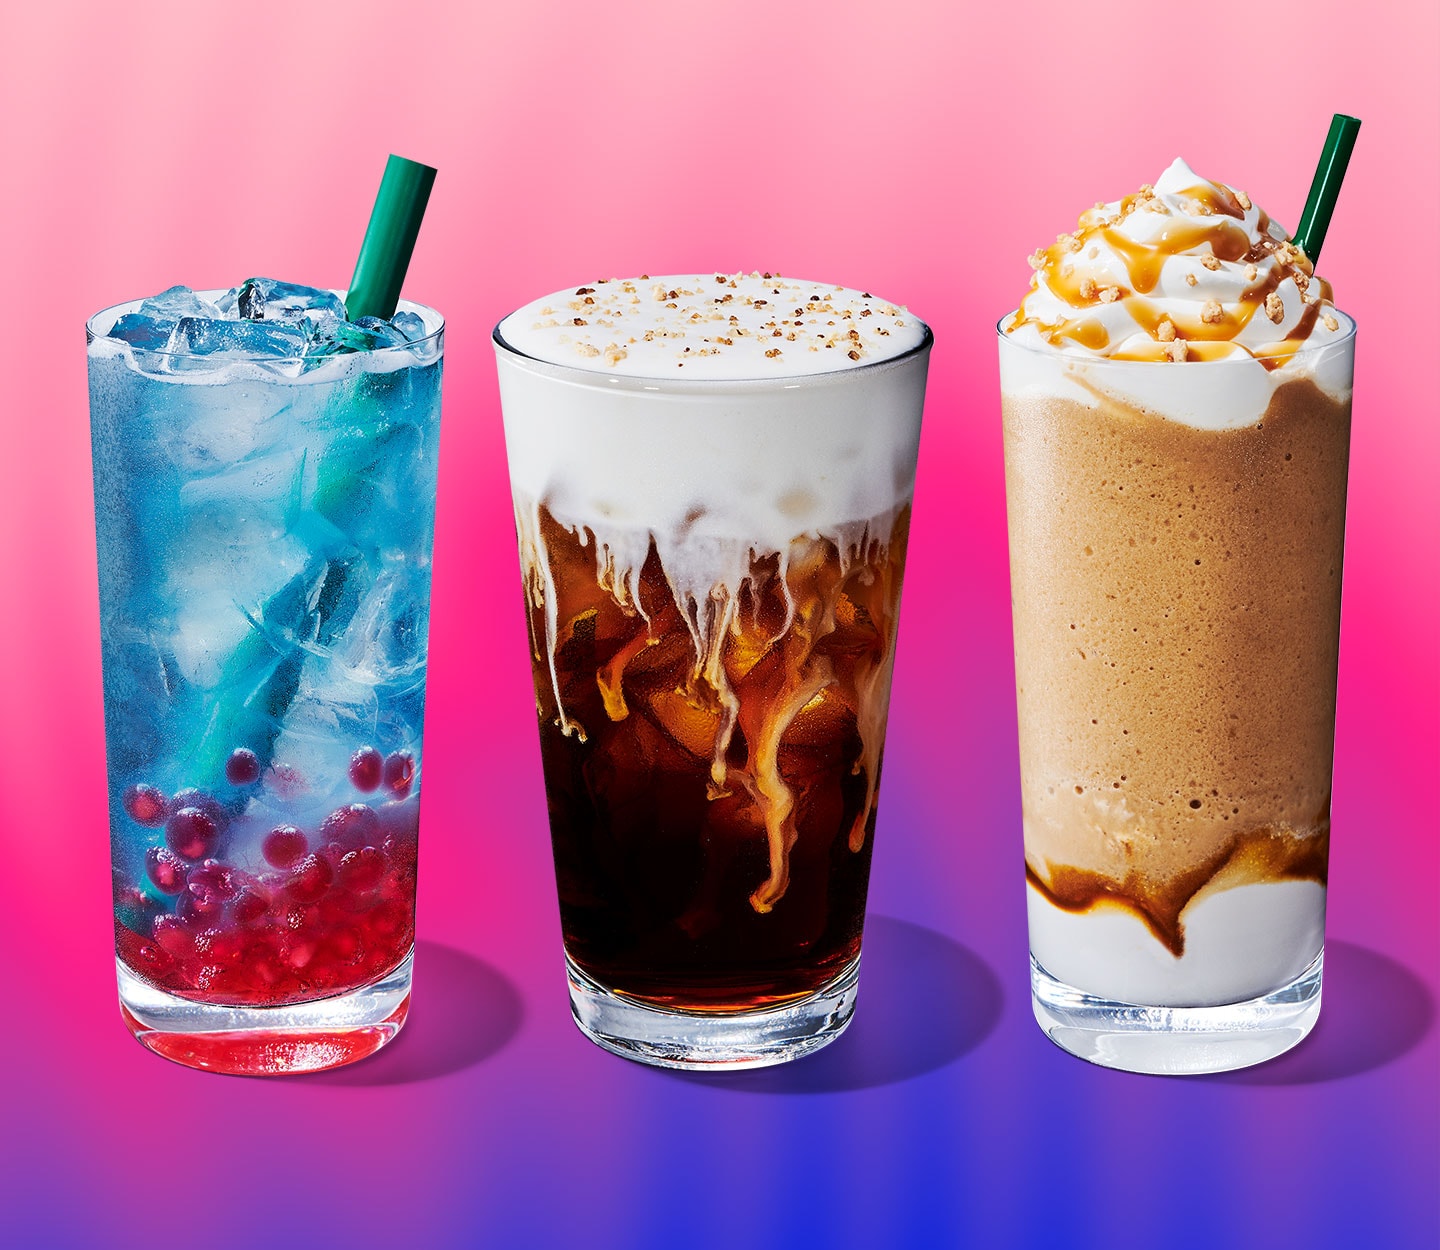 A blue drink with red pearls, a cold coffee with creamy topping and cookie sprinkles, and a blended coffee drink with whipped cream.